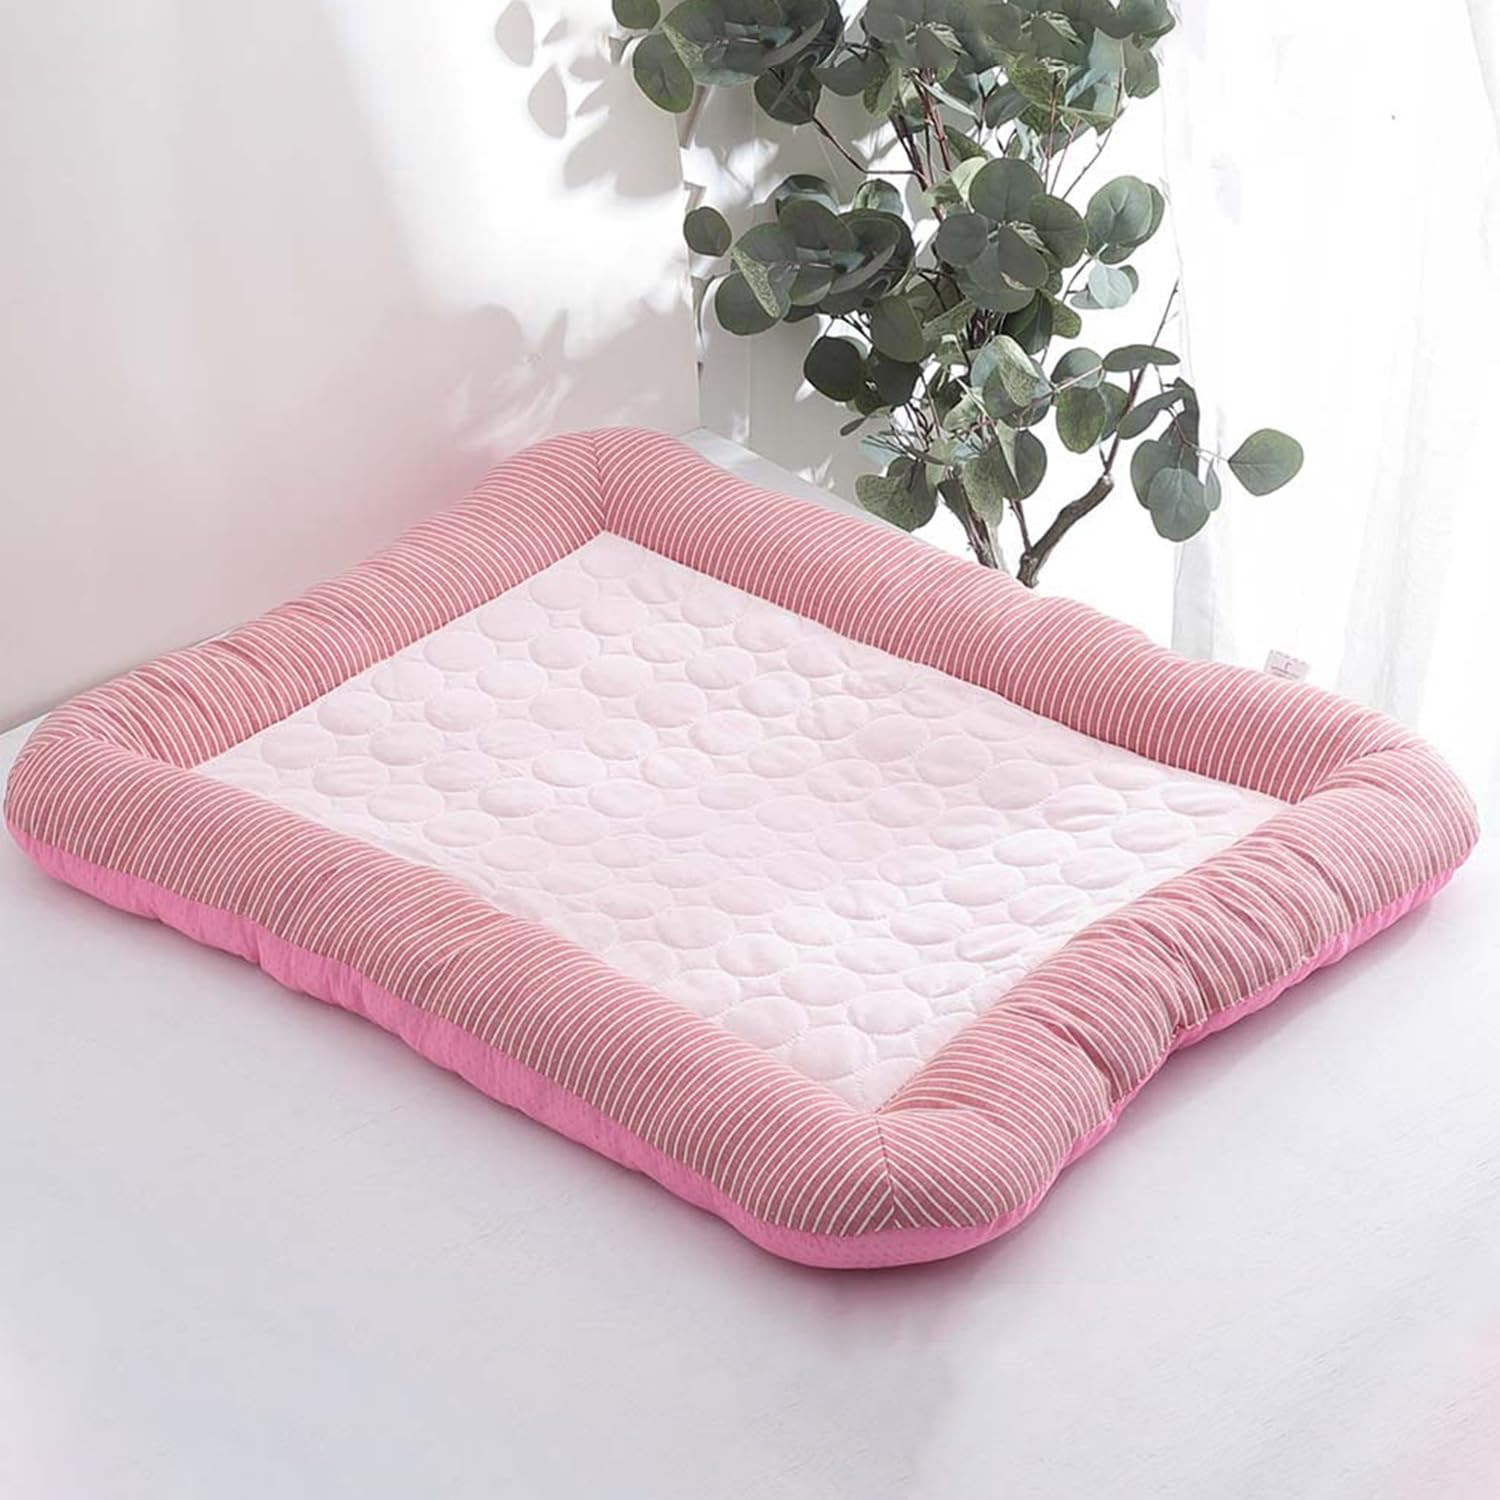 Kuber Industries Rectangular Dog & Cat Bed|Yarn Dyed Oxford Cloth|Nylon and Polyester with Cotton Filling|Self-Cooling Bed for Dog & Cat|Small Light-Weight & Durable Dog Bed|ZQCJ005P-S|Pink